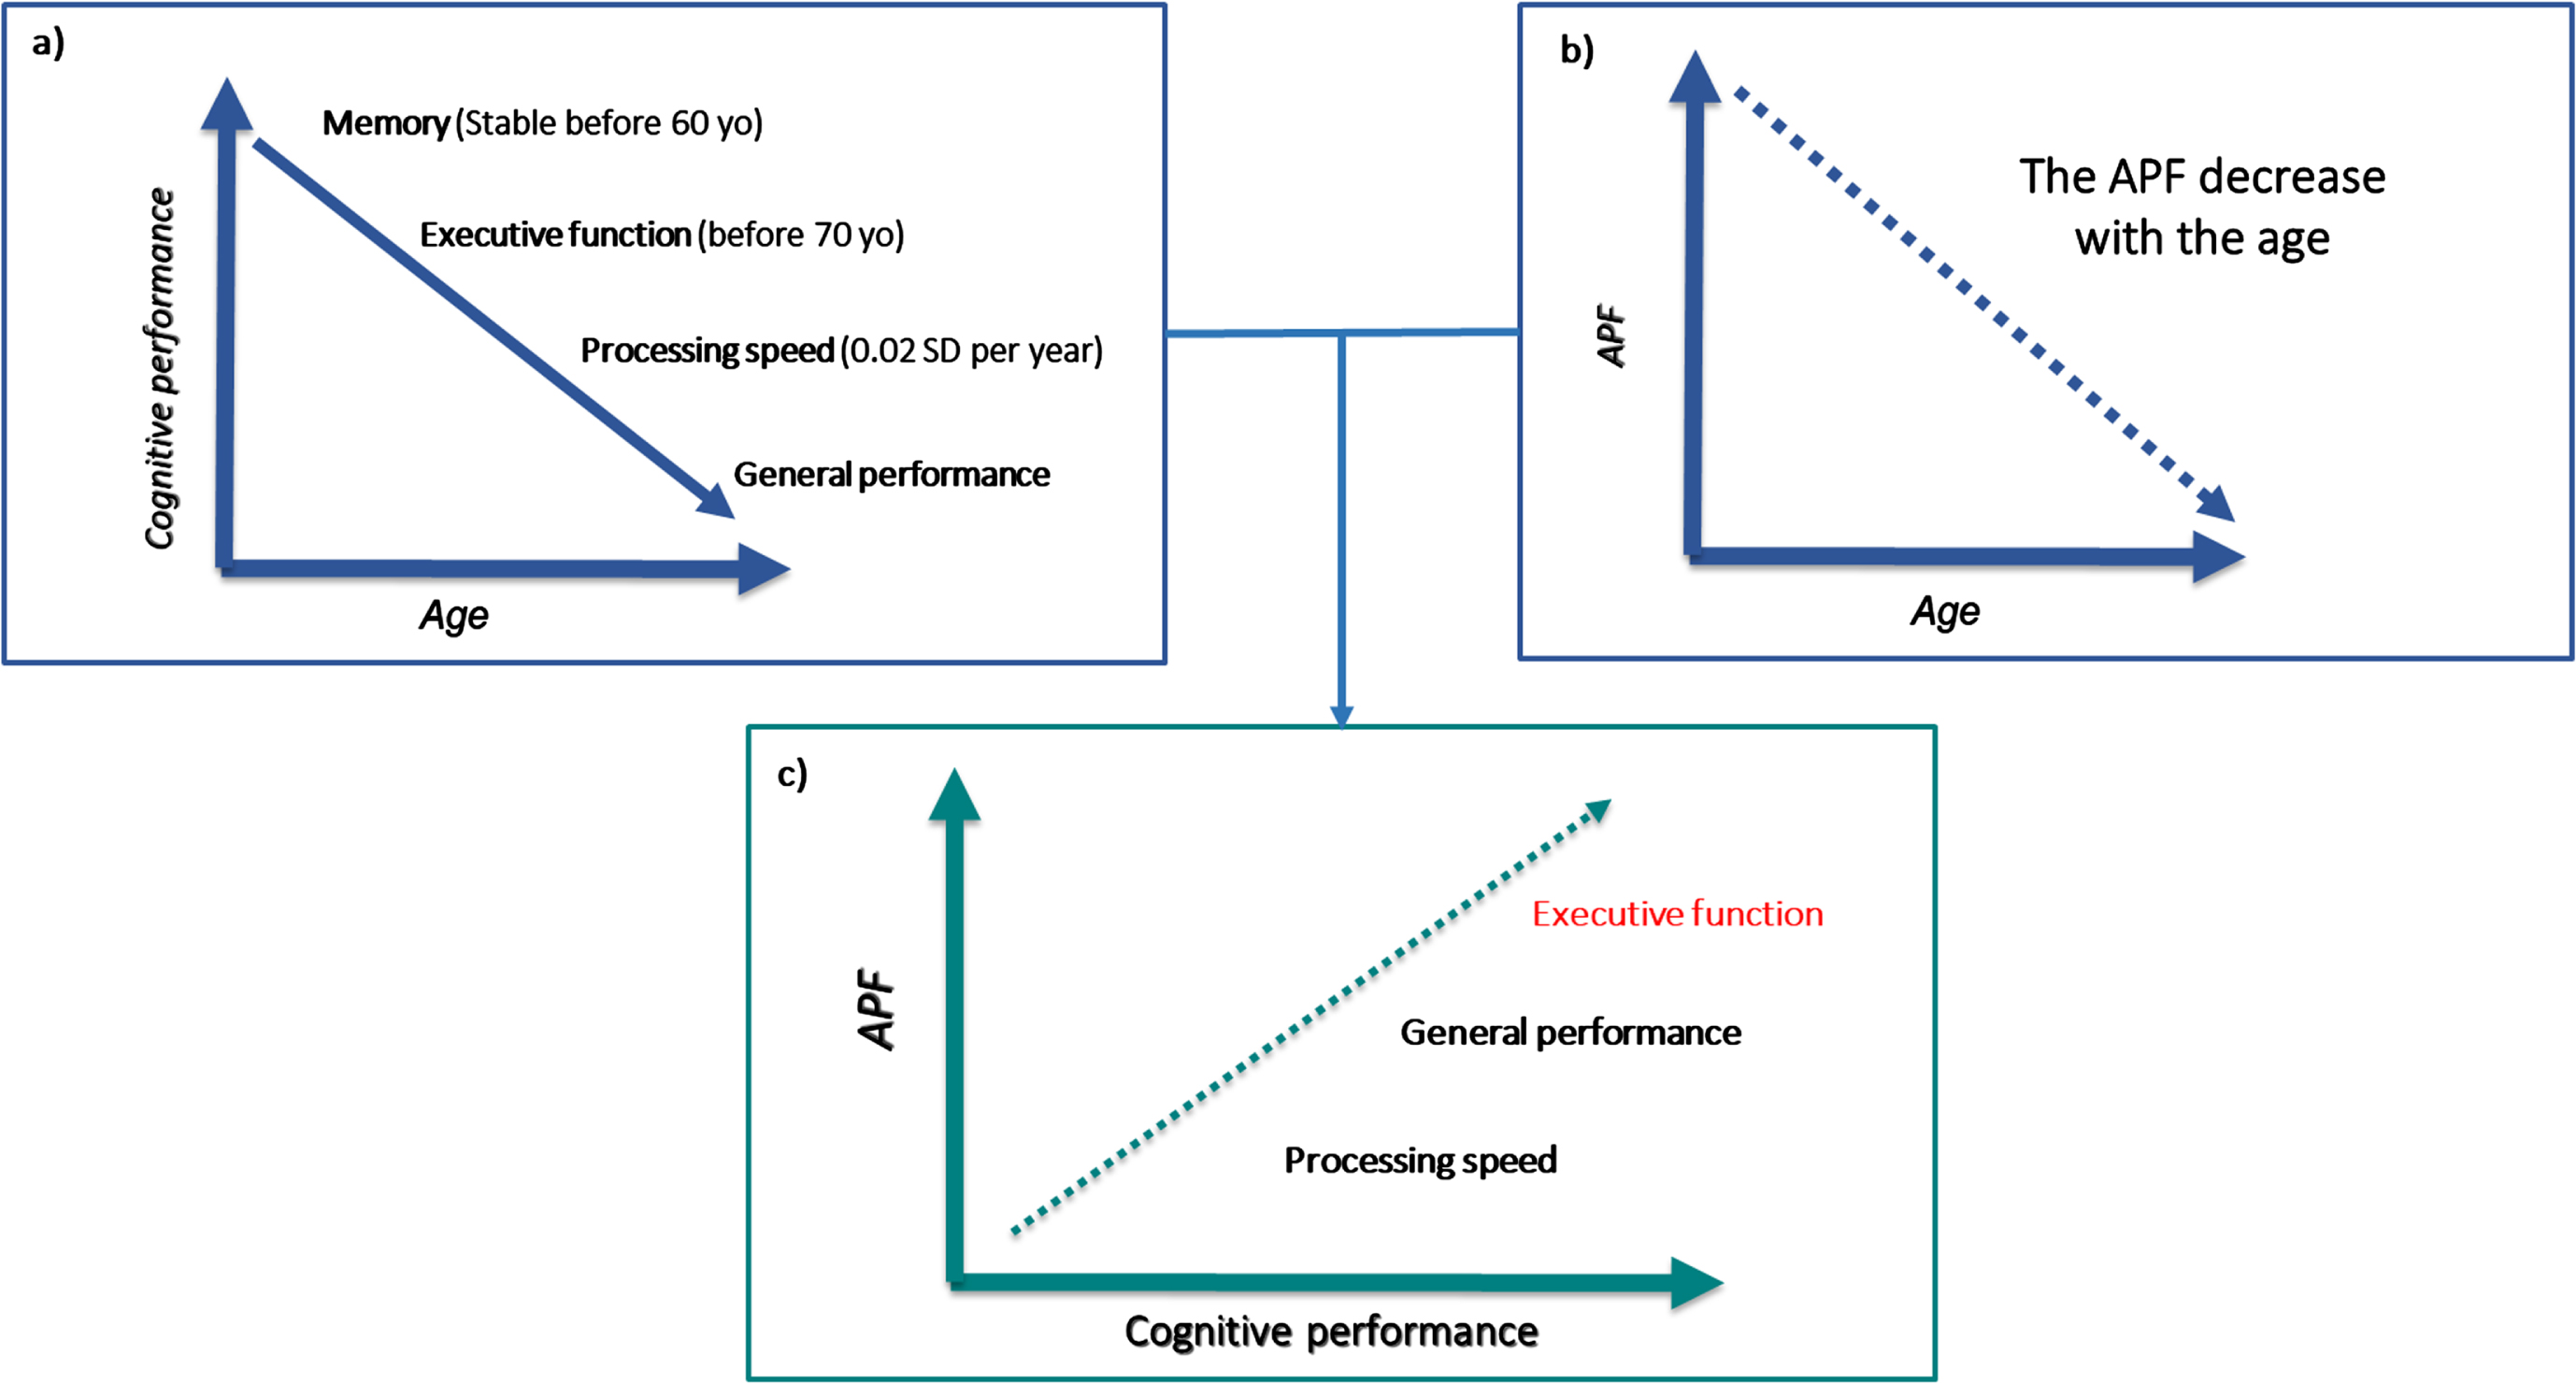 Cognitive performance associated with alpha peak frequency (APF) in subjects without cognitive impairment. a) Various studies show a decrease in cognitive performance with increasing aging [32–34]; b) Interestingly, this pattern was also documented in the relationship between APF and age. c) Our review suggests that a higher APF is linked with a higher score in intelligence, executive function, and general cognitive performance and could be considered an optimal, and easy-to-assess, electrophysiological marker of cognitive health in older adults.